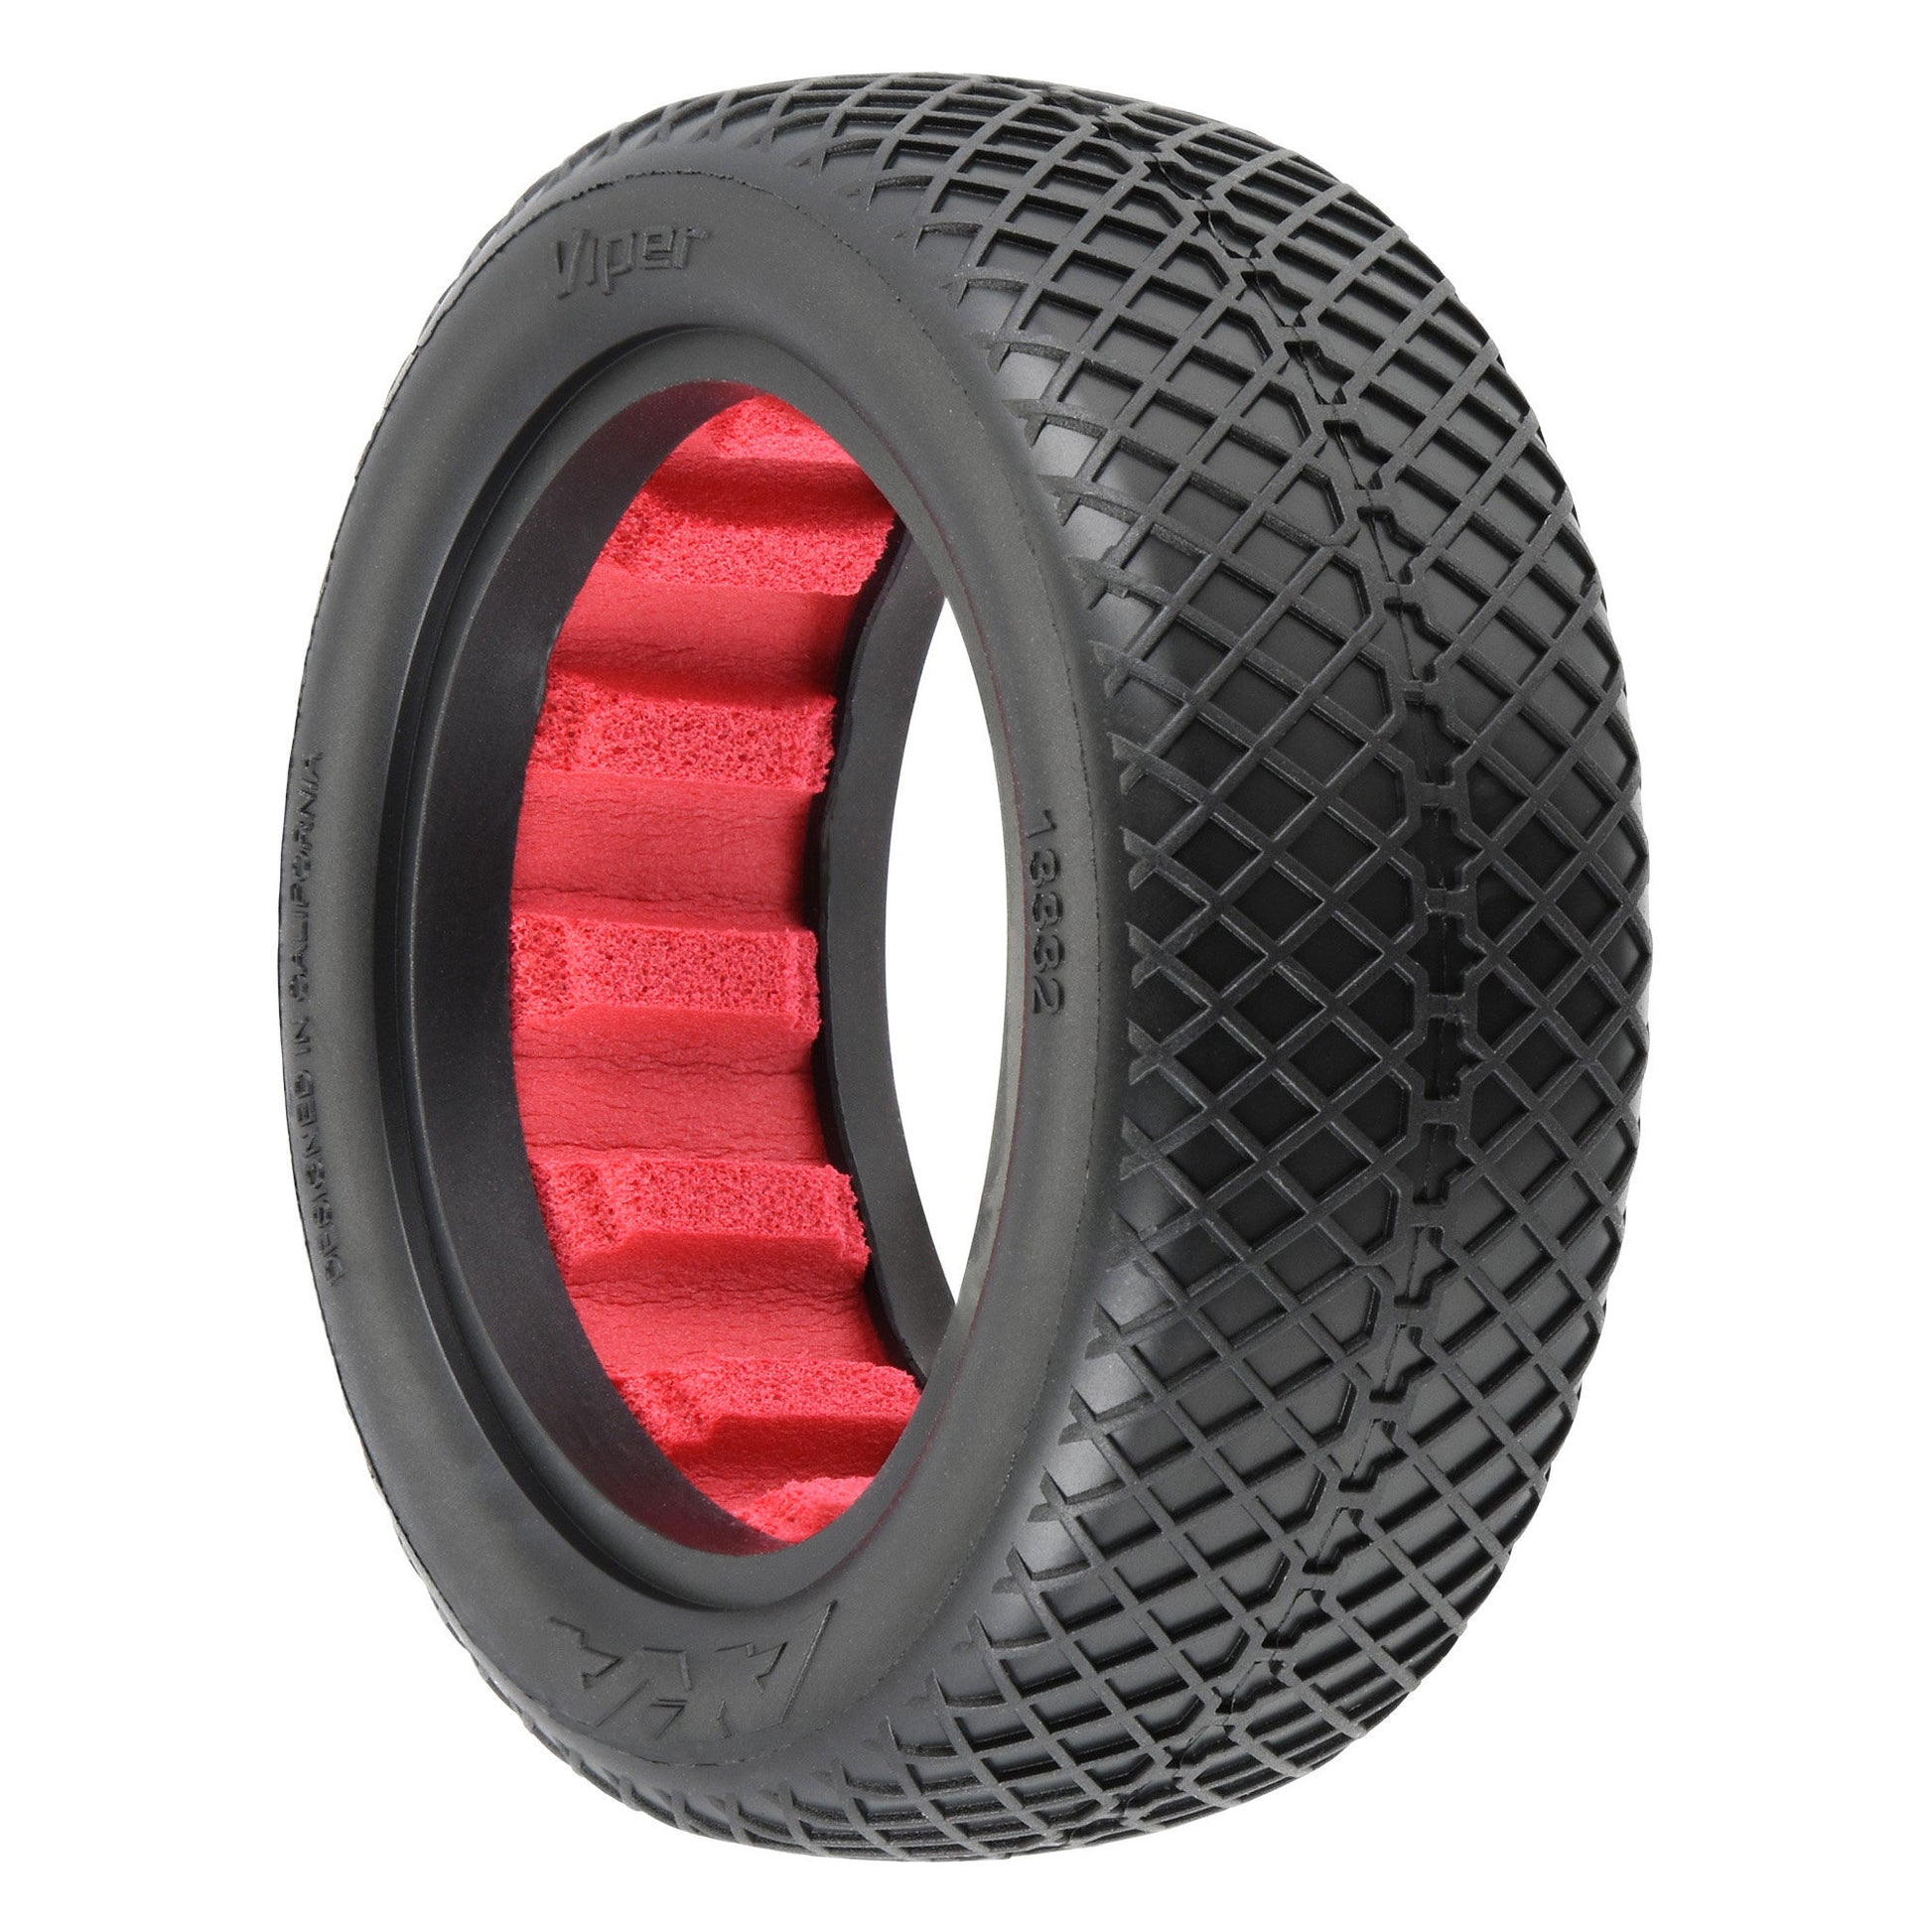 1/10 Viper Medium Soft 4WD Front 2.2" Off-Road Buggy Tires (2) - Dirt Cheap RC SAVING YOU MONEY, ONE PART AT A TIME